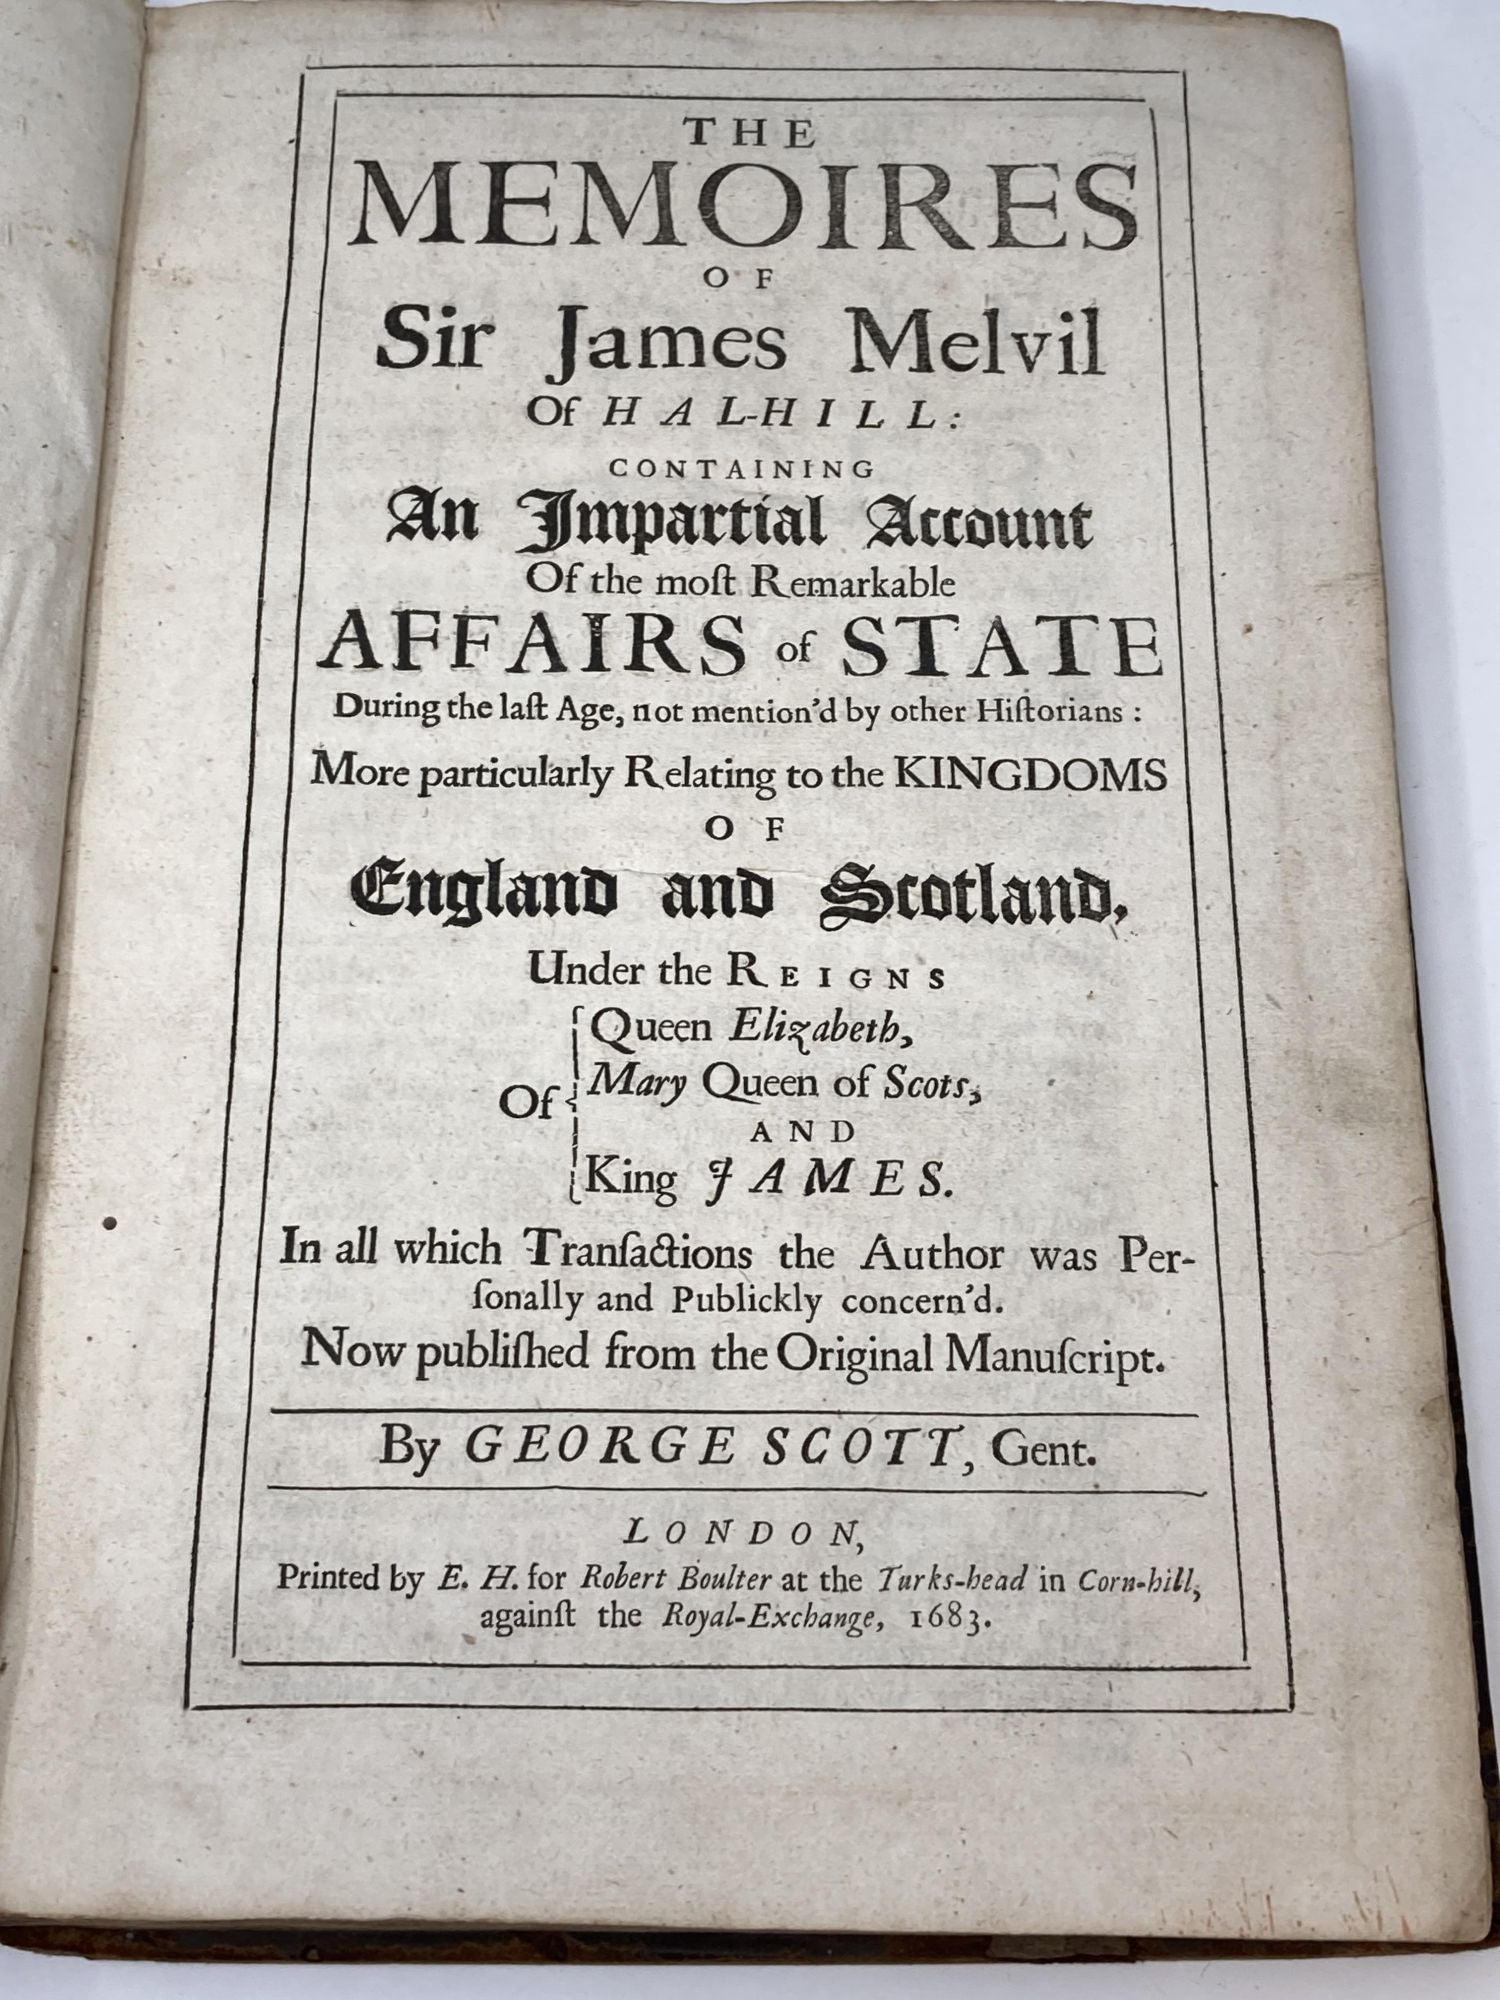 Scott, George - The Memoires of Sir James Melvil of Hal-Hill Containing an Impartial Account of the Most Remarkable Affairs of State During the Last Age, Not Mention'd by Other Historicans: More Particularly Relating to the Kingdoms of England and Scotland, Under the Reigns of Queen Elizabeth, Mary Queen of Scots and King James. In All Which Transactions the Author Was Personally and Publickly Concern'd